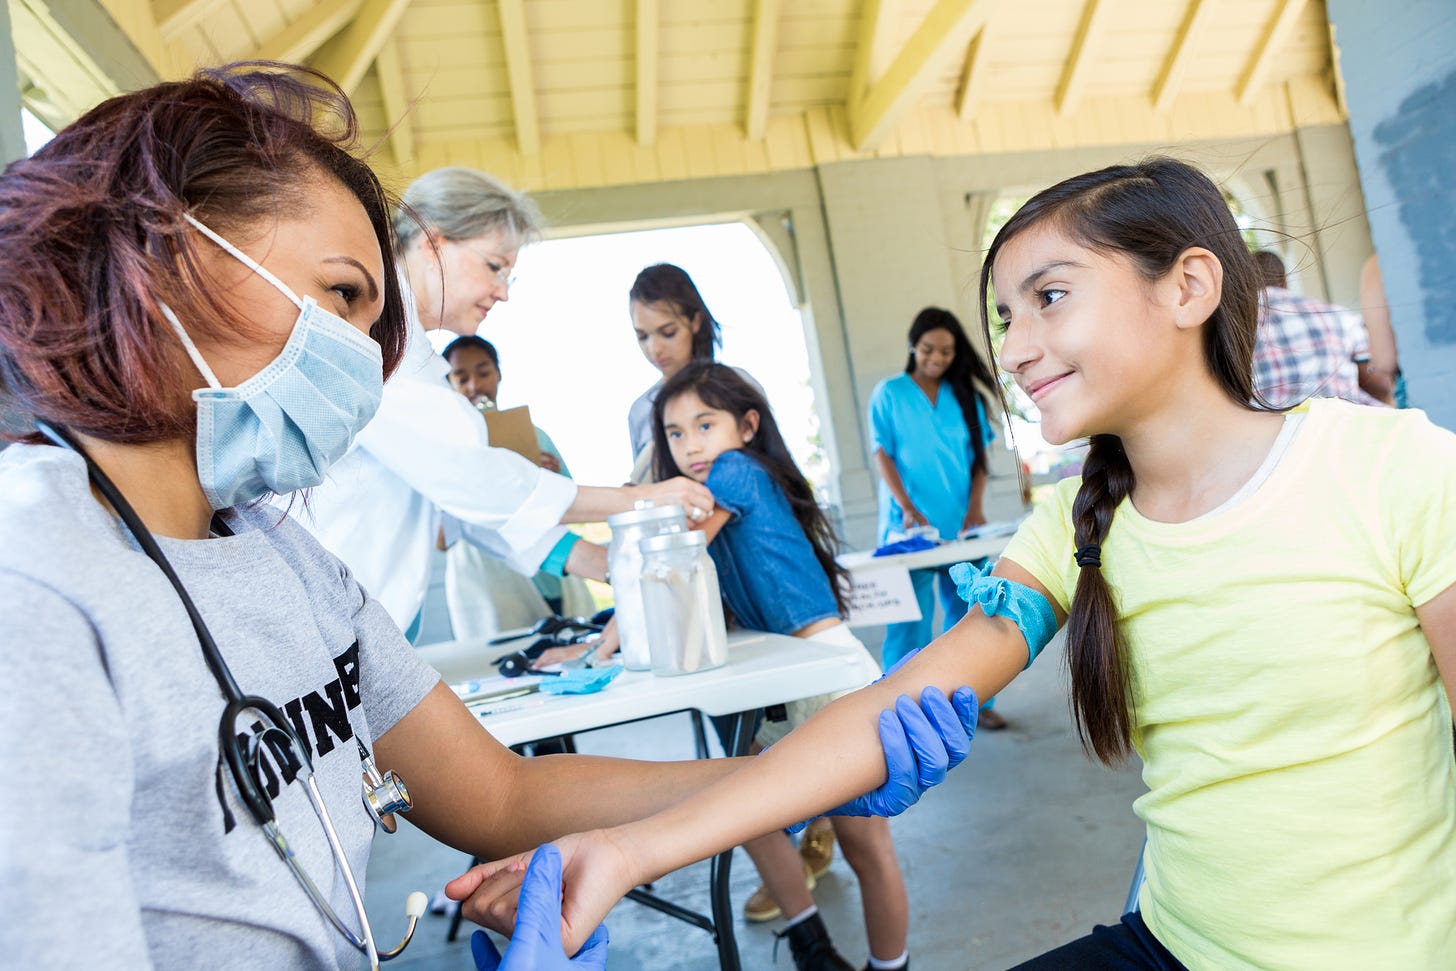 A healthcare worker administers care to a girl.